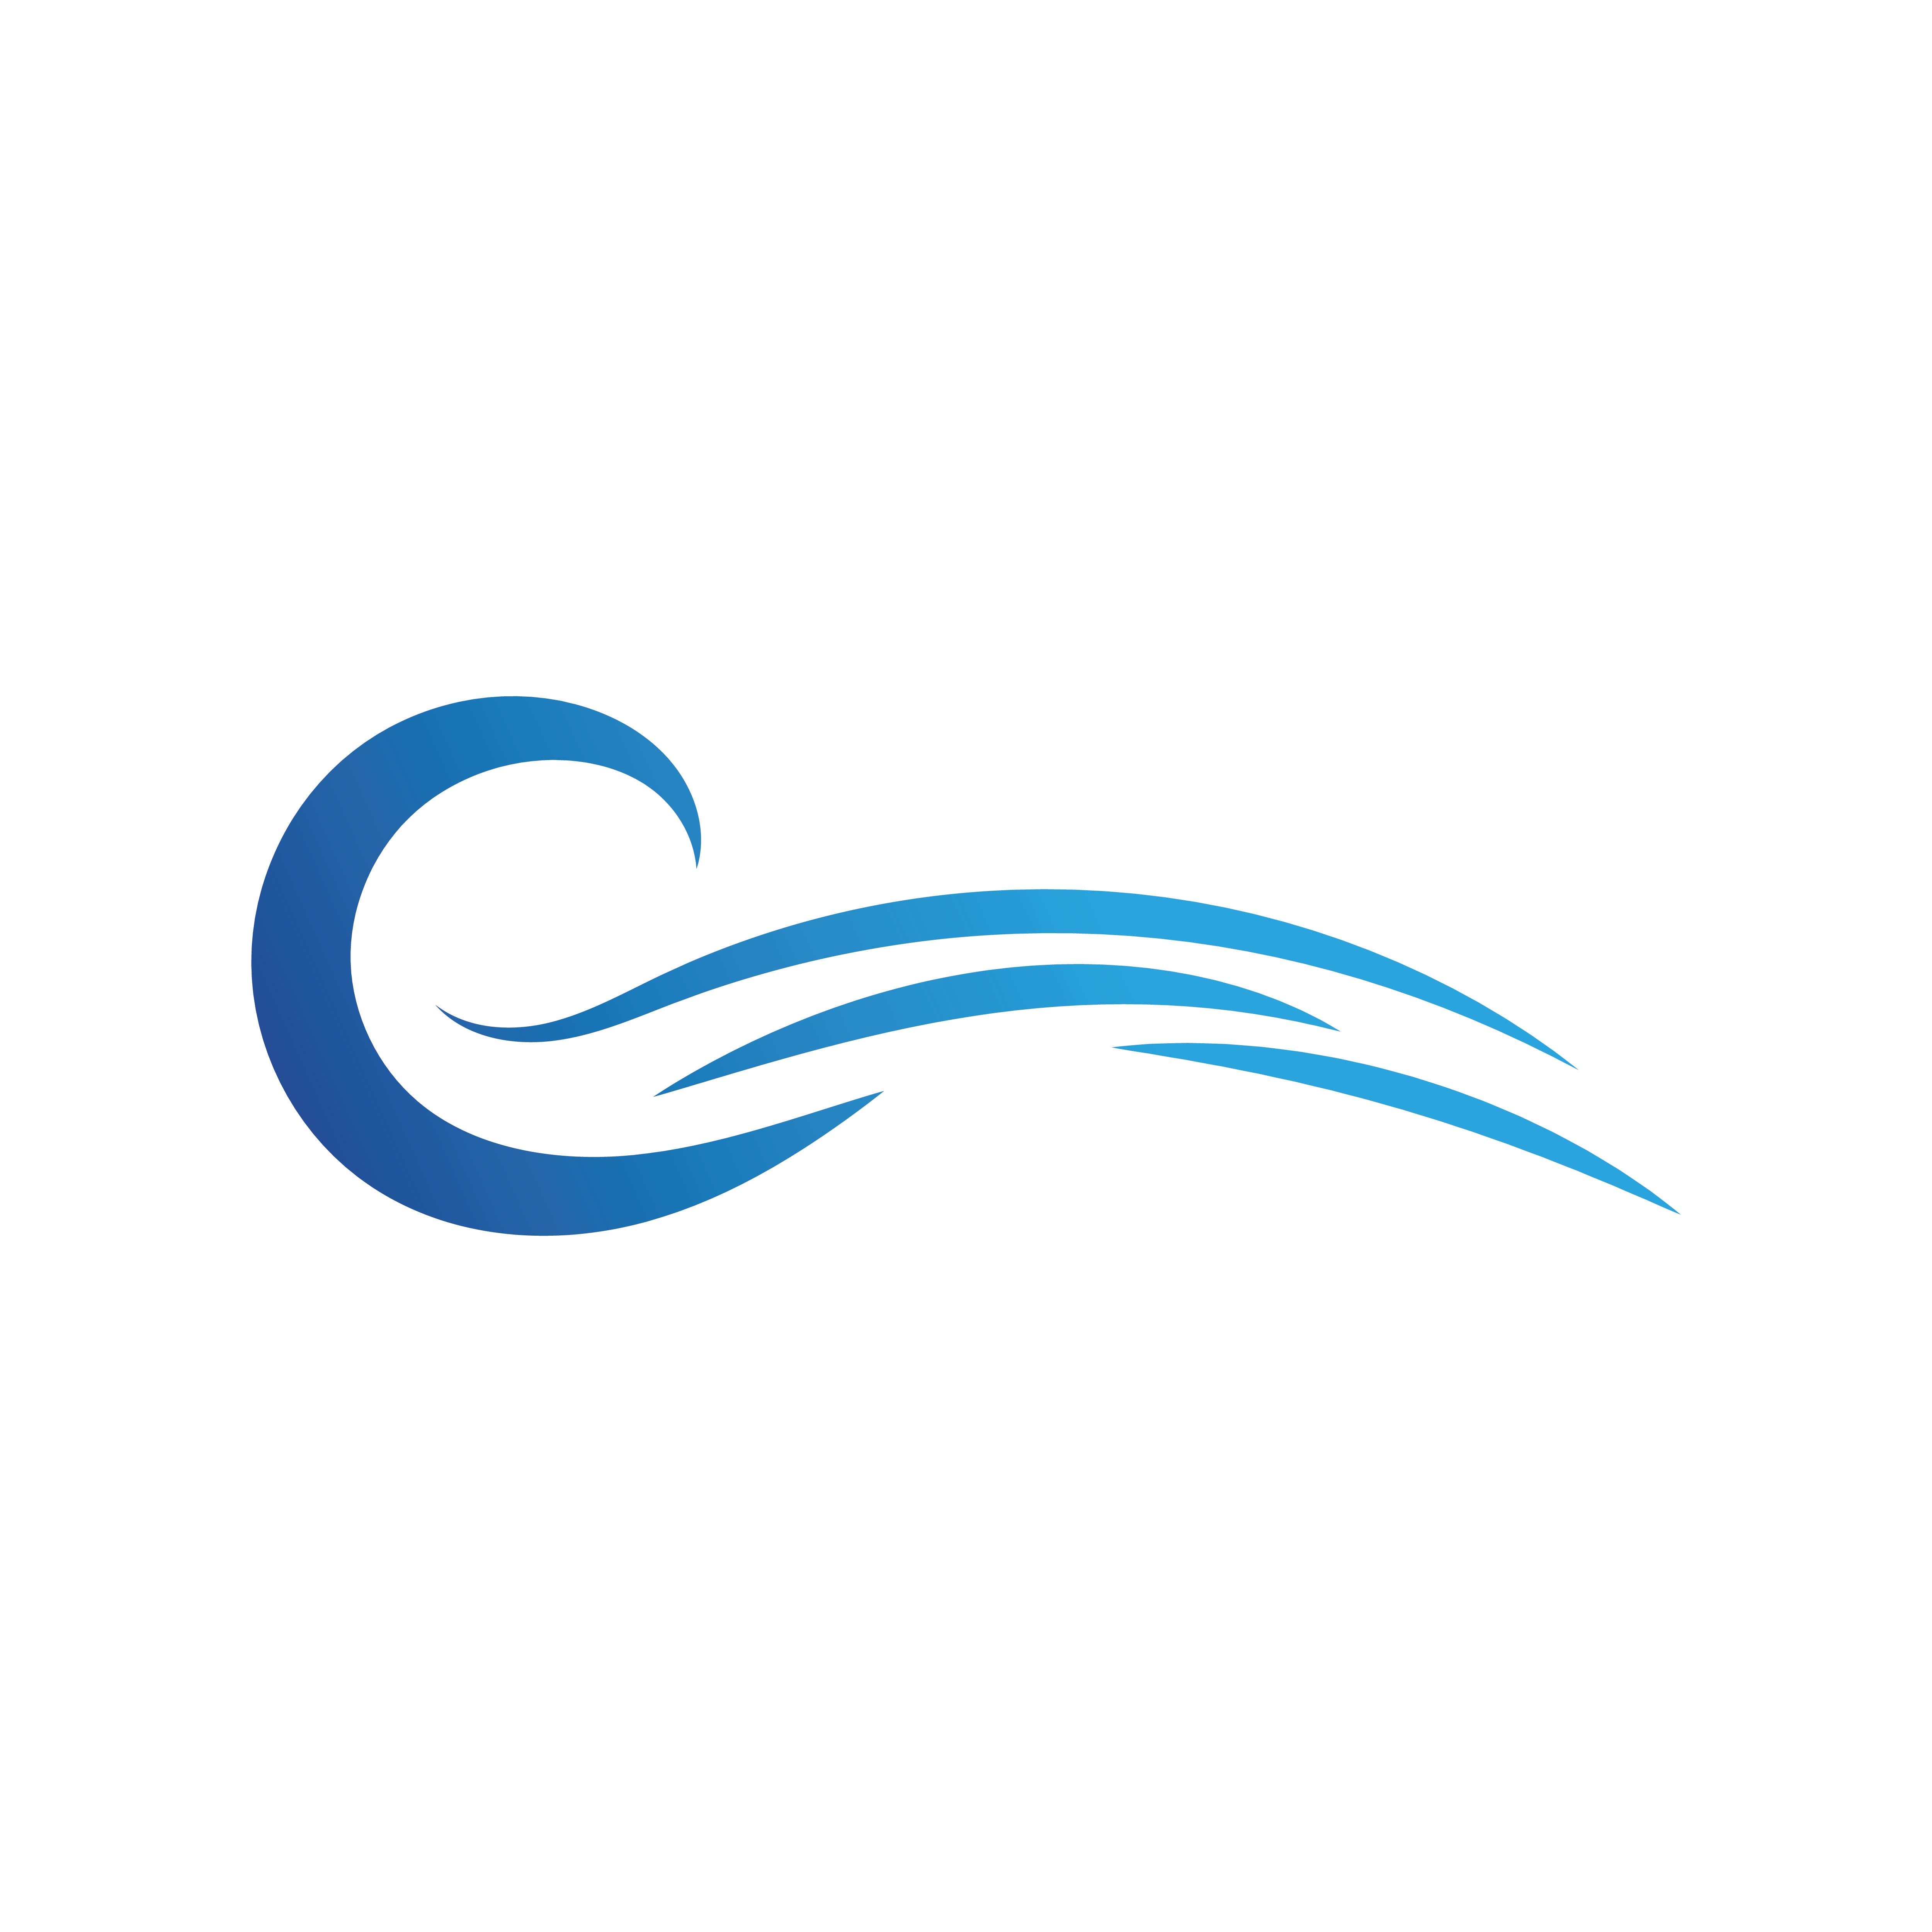 Water wave beach logo symbol cover image.